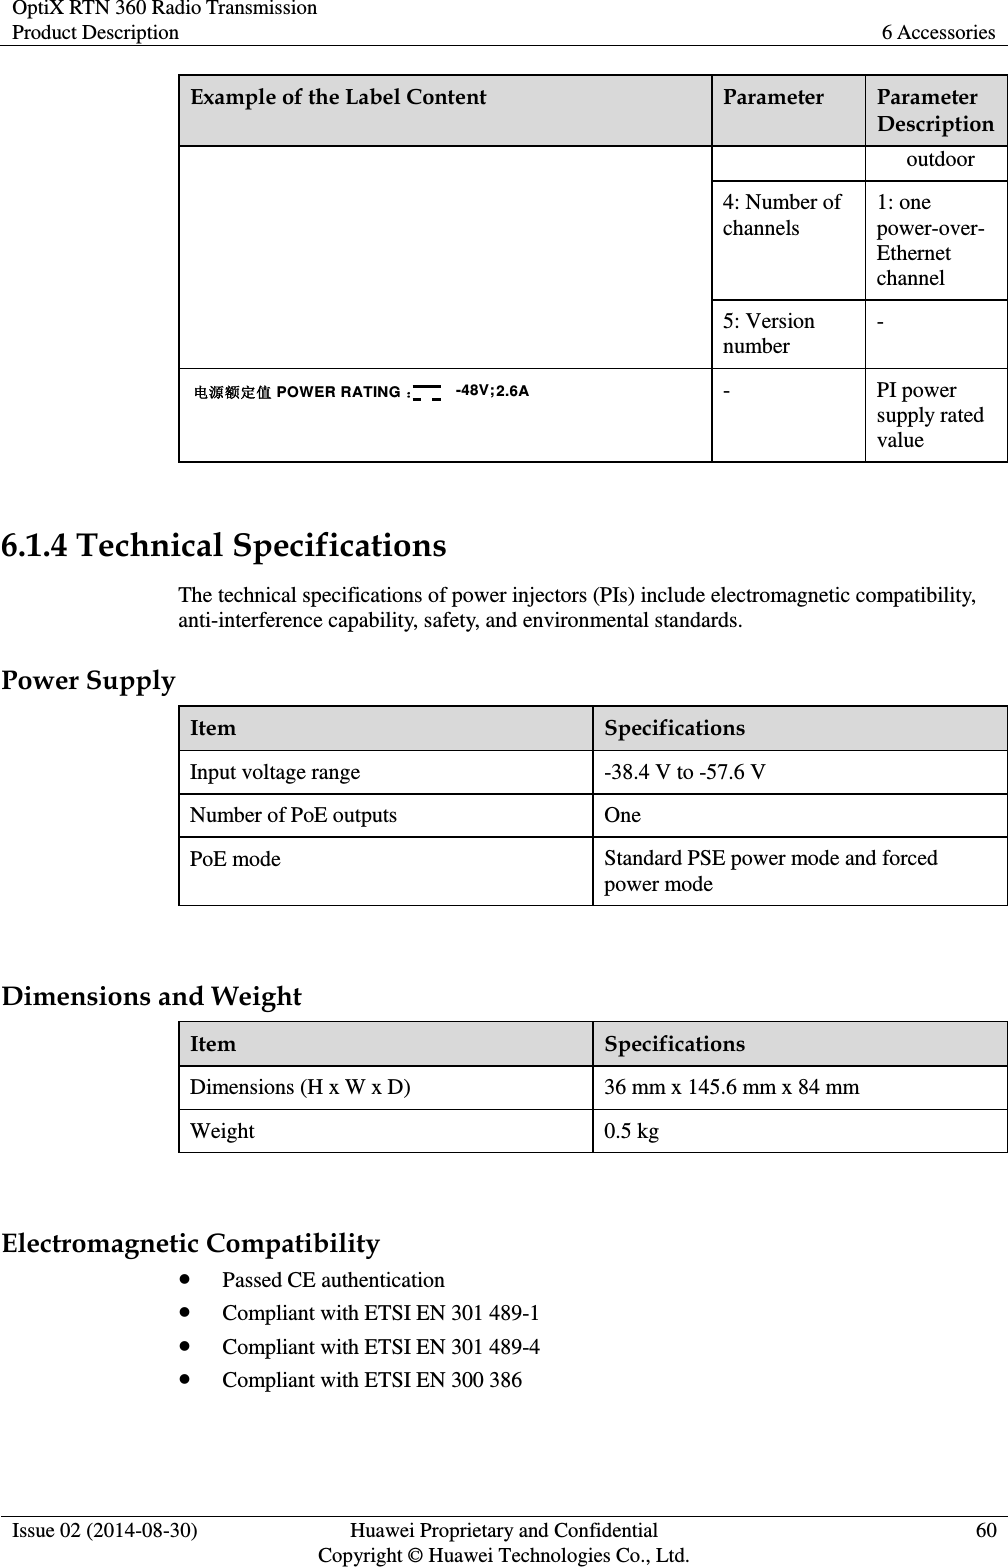 OptiX RTN 360 Radio Transmission Product Description 6 Accessories  Issue 02 (2014-08-30) Huawei Proprietary and Confidential                                     Copyright © Huawei Technologies Co., Ltd. 60  Example of the Label Content   Parameter Parameter Description outdoor 4: Number of channels 1: one power-over-Ethernet channel 5: Version number - 电源额定值 POWER RATING ：-48V; 2.2A2.6A - PI power supply rated value    6.1.4 Technical Specifications The technical specifications of power injectors (PIs) include electromagnetic compatibility, anti-interference capability, safety, and environmental standards. Power Supply Item Specifications Input voltage range -38.4 V to -57.6 V Number of PoE outputs One PoE mode Standard PSE power mode and forced power mode  Dimensions and Weight Item Specifications Dimensions (H x W x D) 36 mm x 145.6 mm x 84 mm Weight 0.5 kg  Electromagnetic Compatibility  Passed CE authentication    Compliant with ETSI EN 301 489-1  Compliant with ETSI EN 301 489-4  Compliant with ETSI EN 300 386 